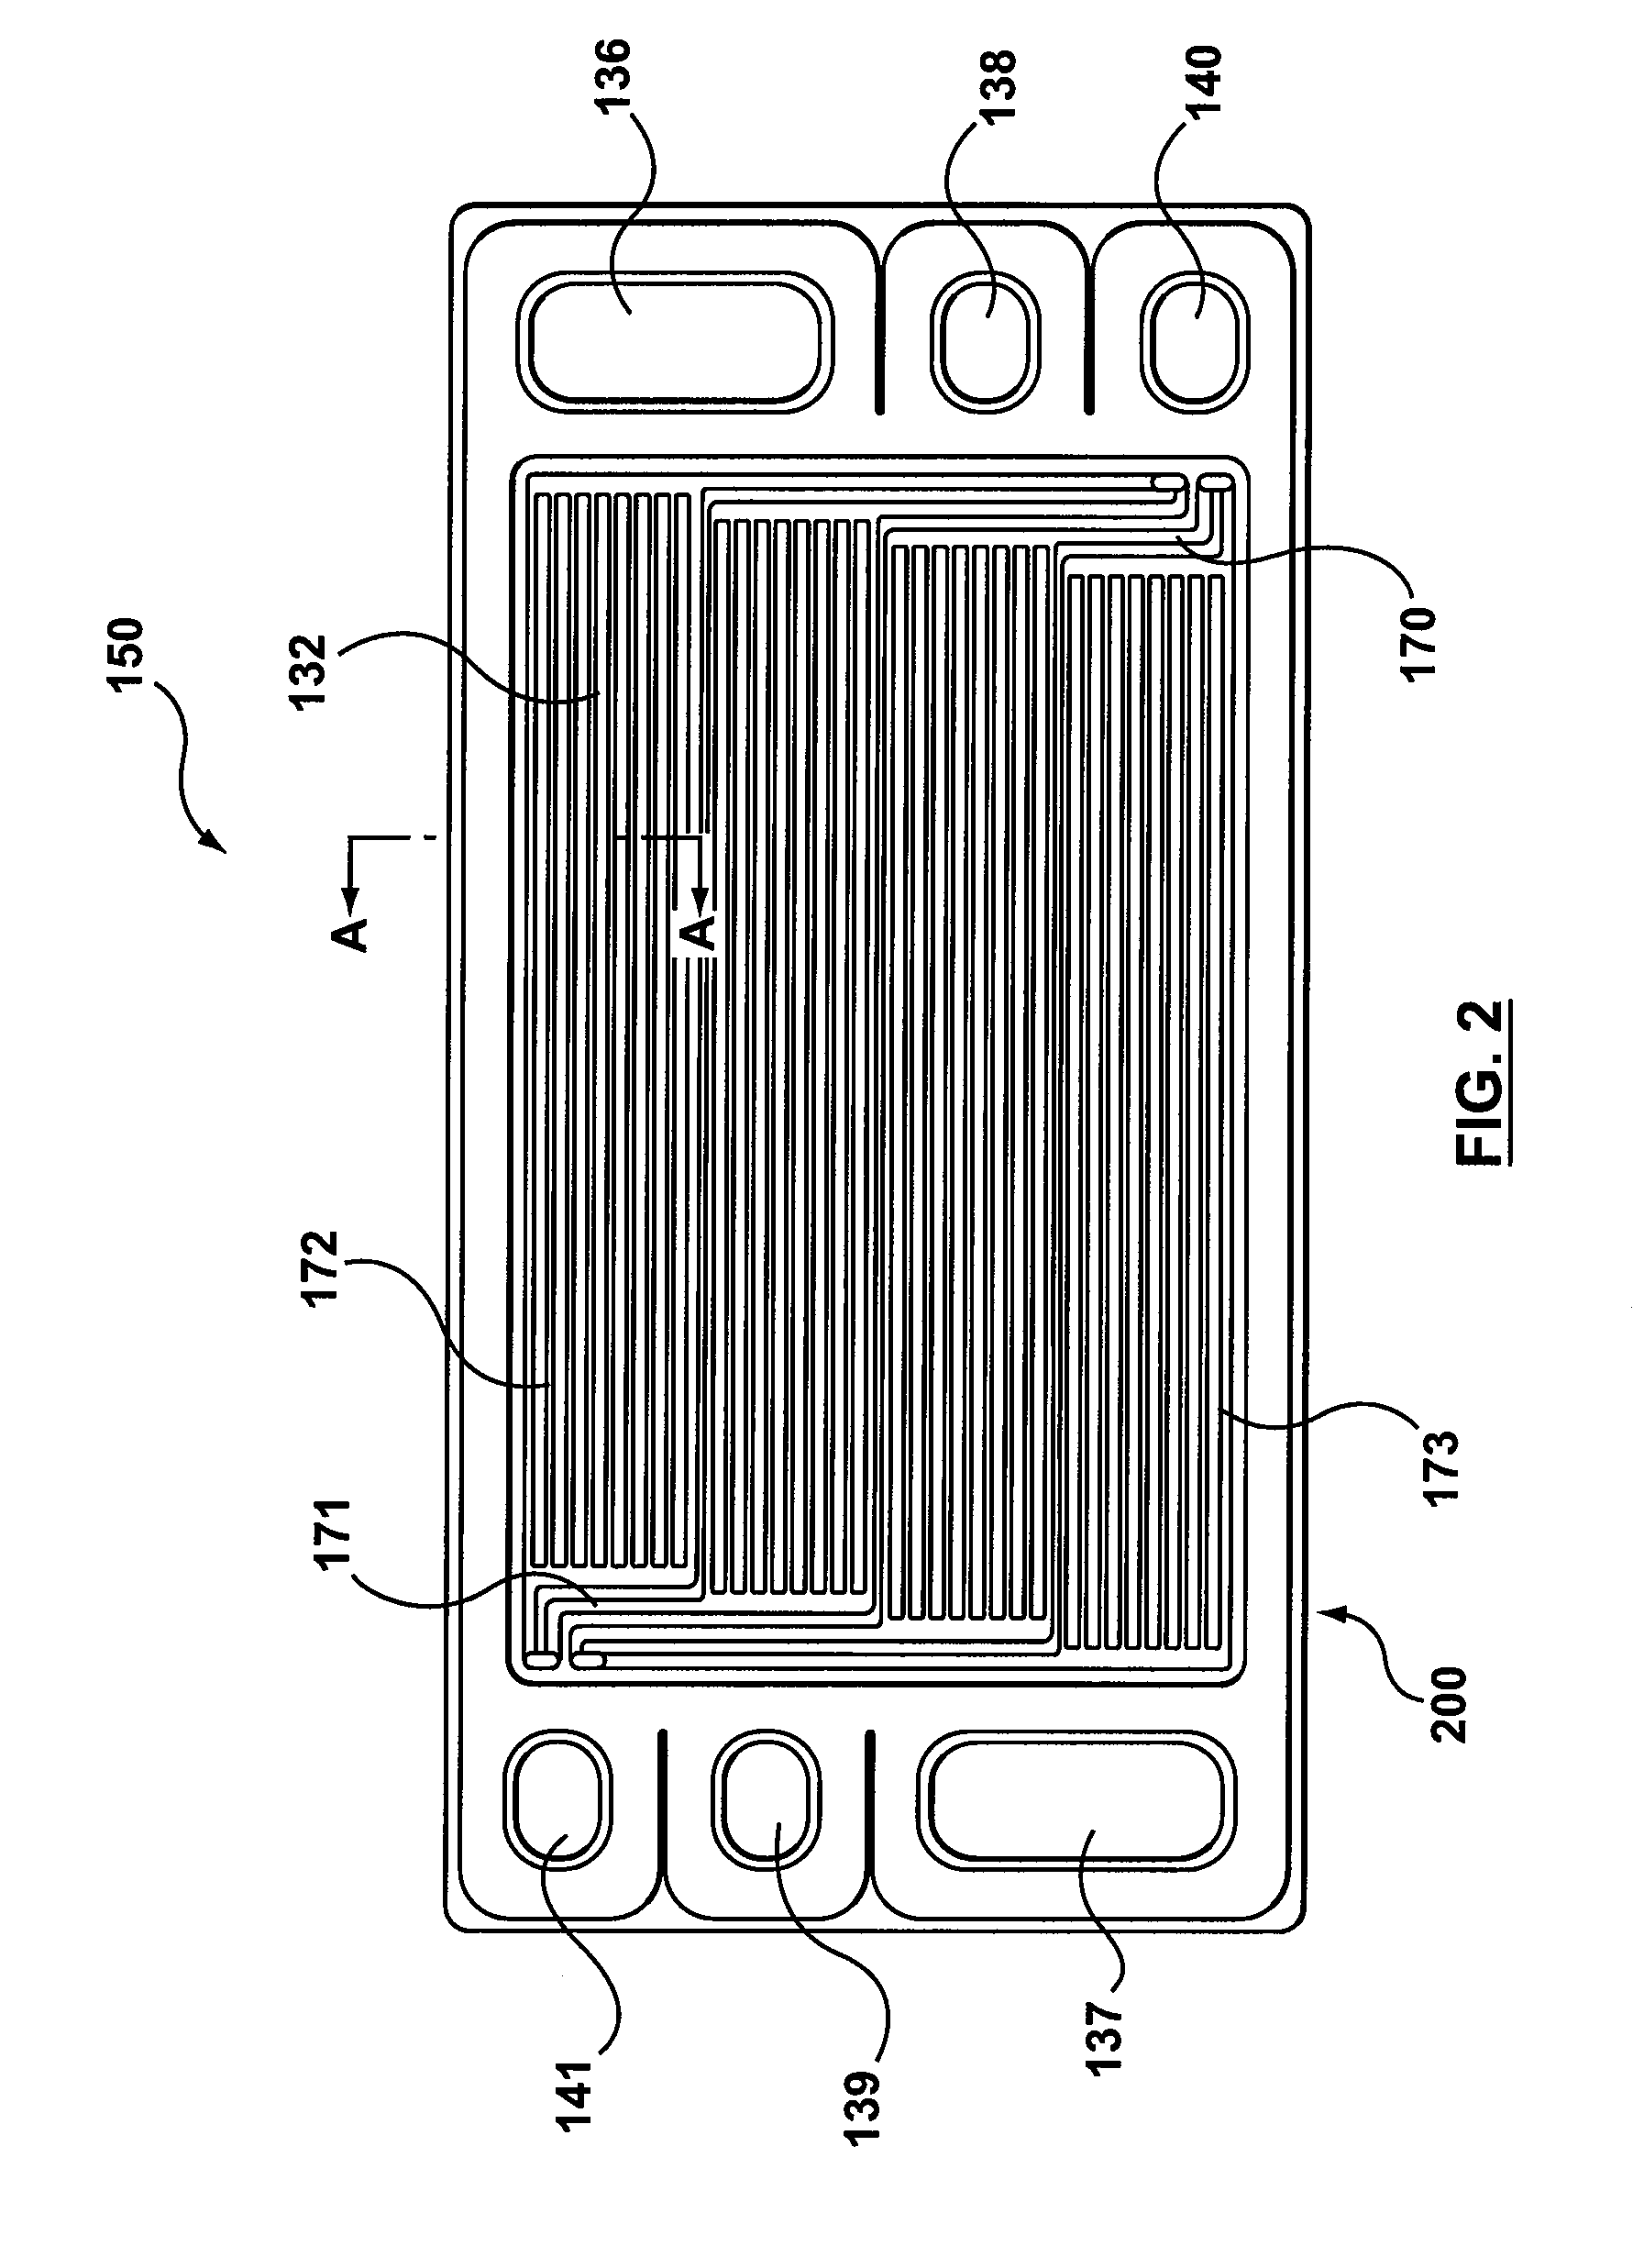 Gas diffusion layer for an electrochemical cell